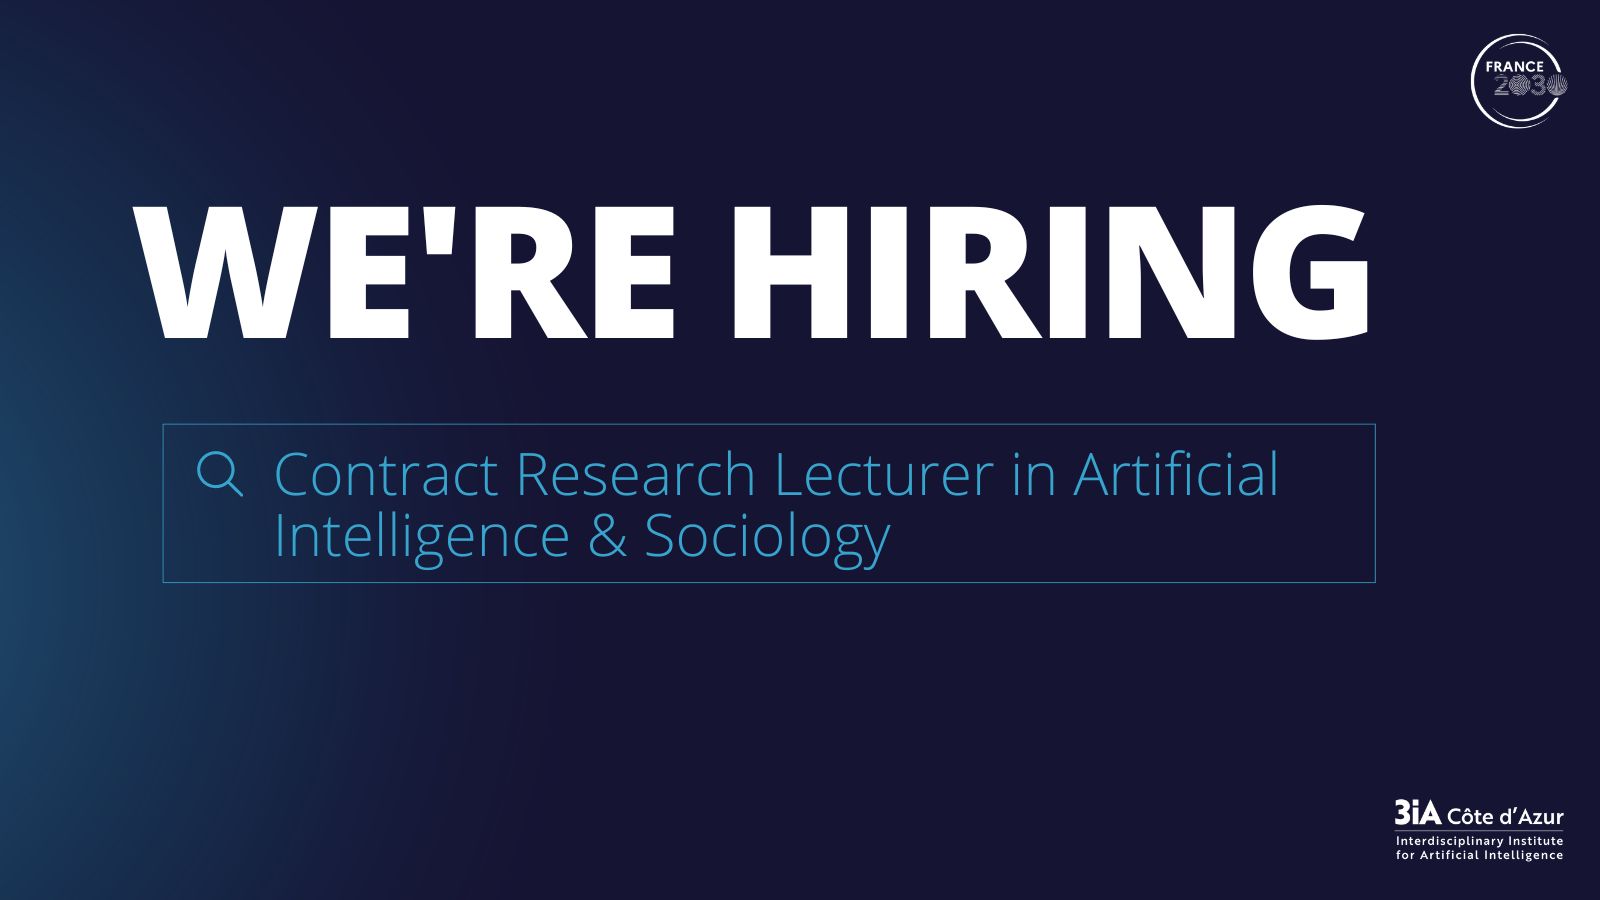 Contract Research Lecturer in Artificial Intelligence & Sociology EFELIA